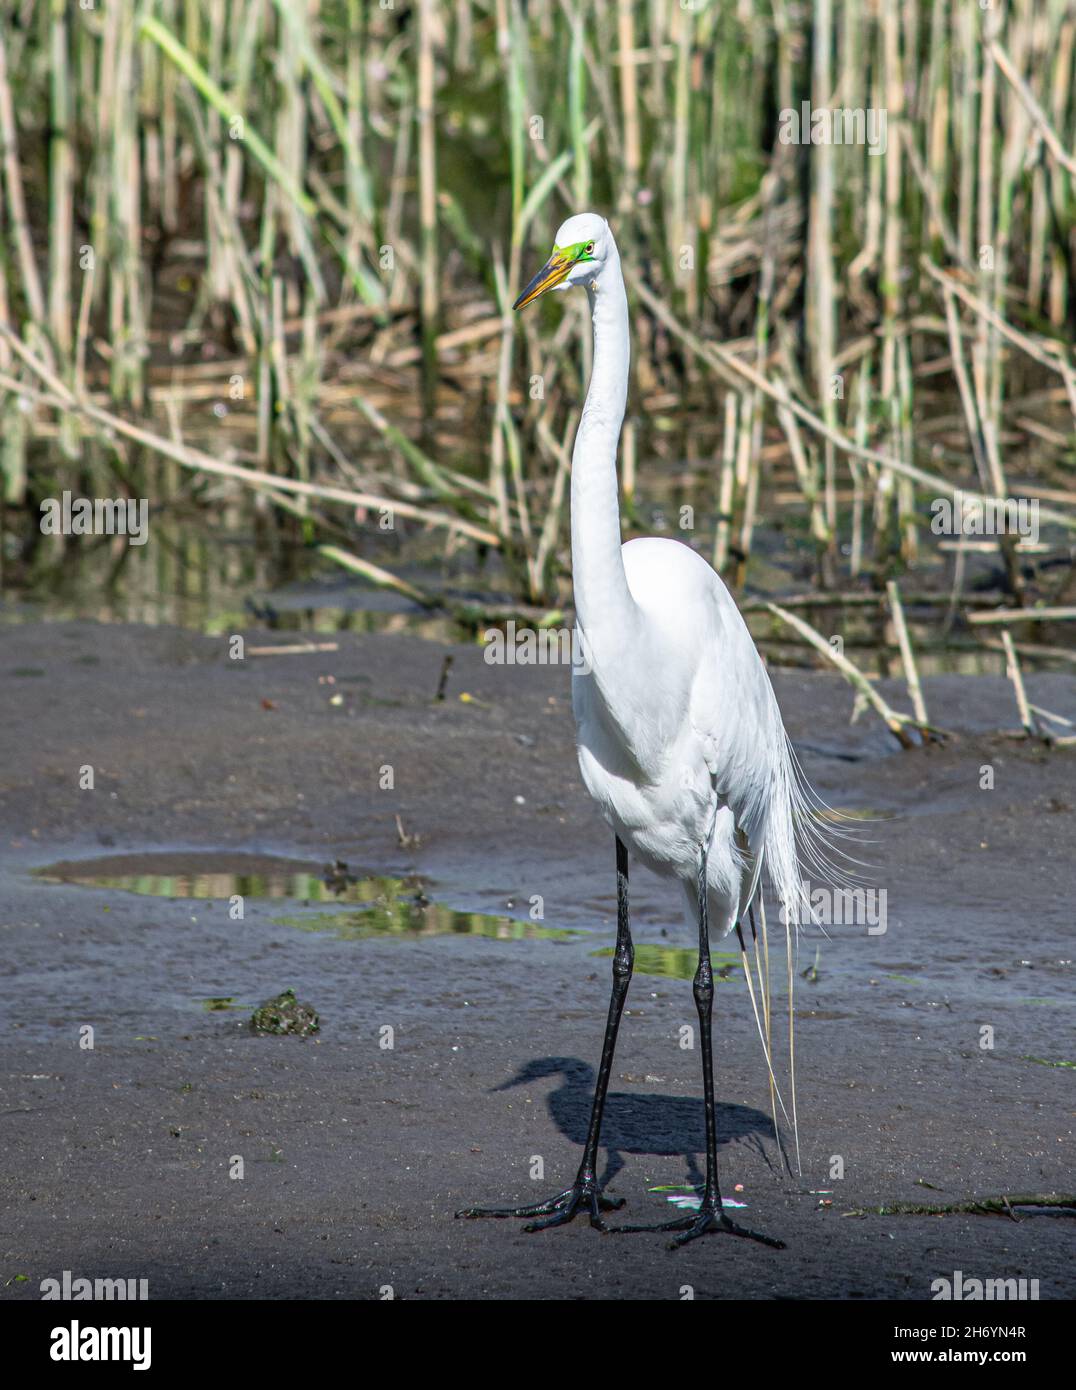 Frontal view of a Great Egret (Ardea alba) standing tall in the wet mud of a tidal marsh. Stock Photo